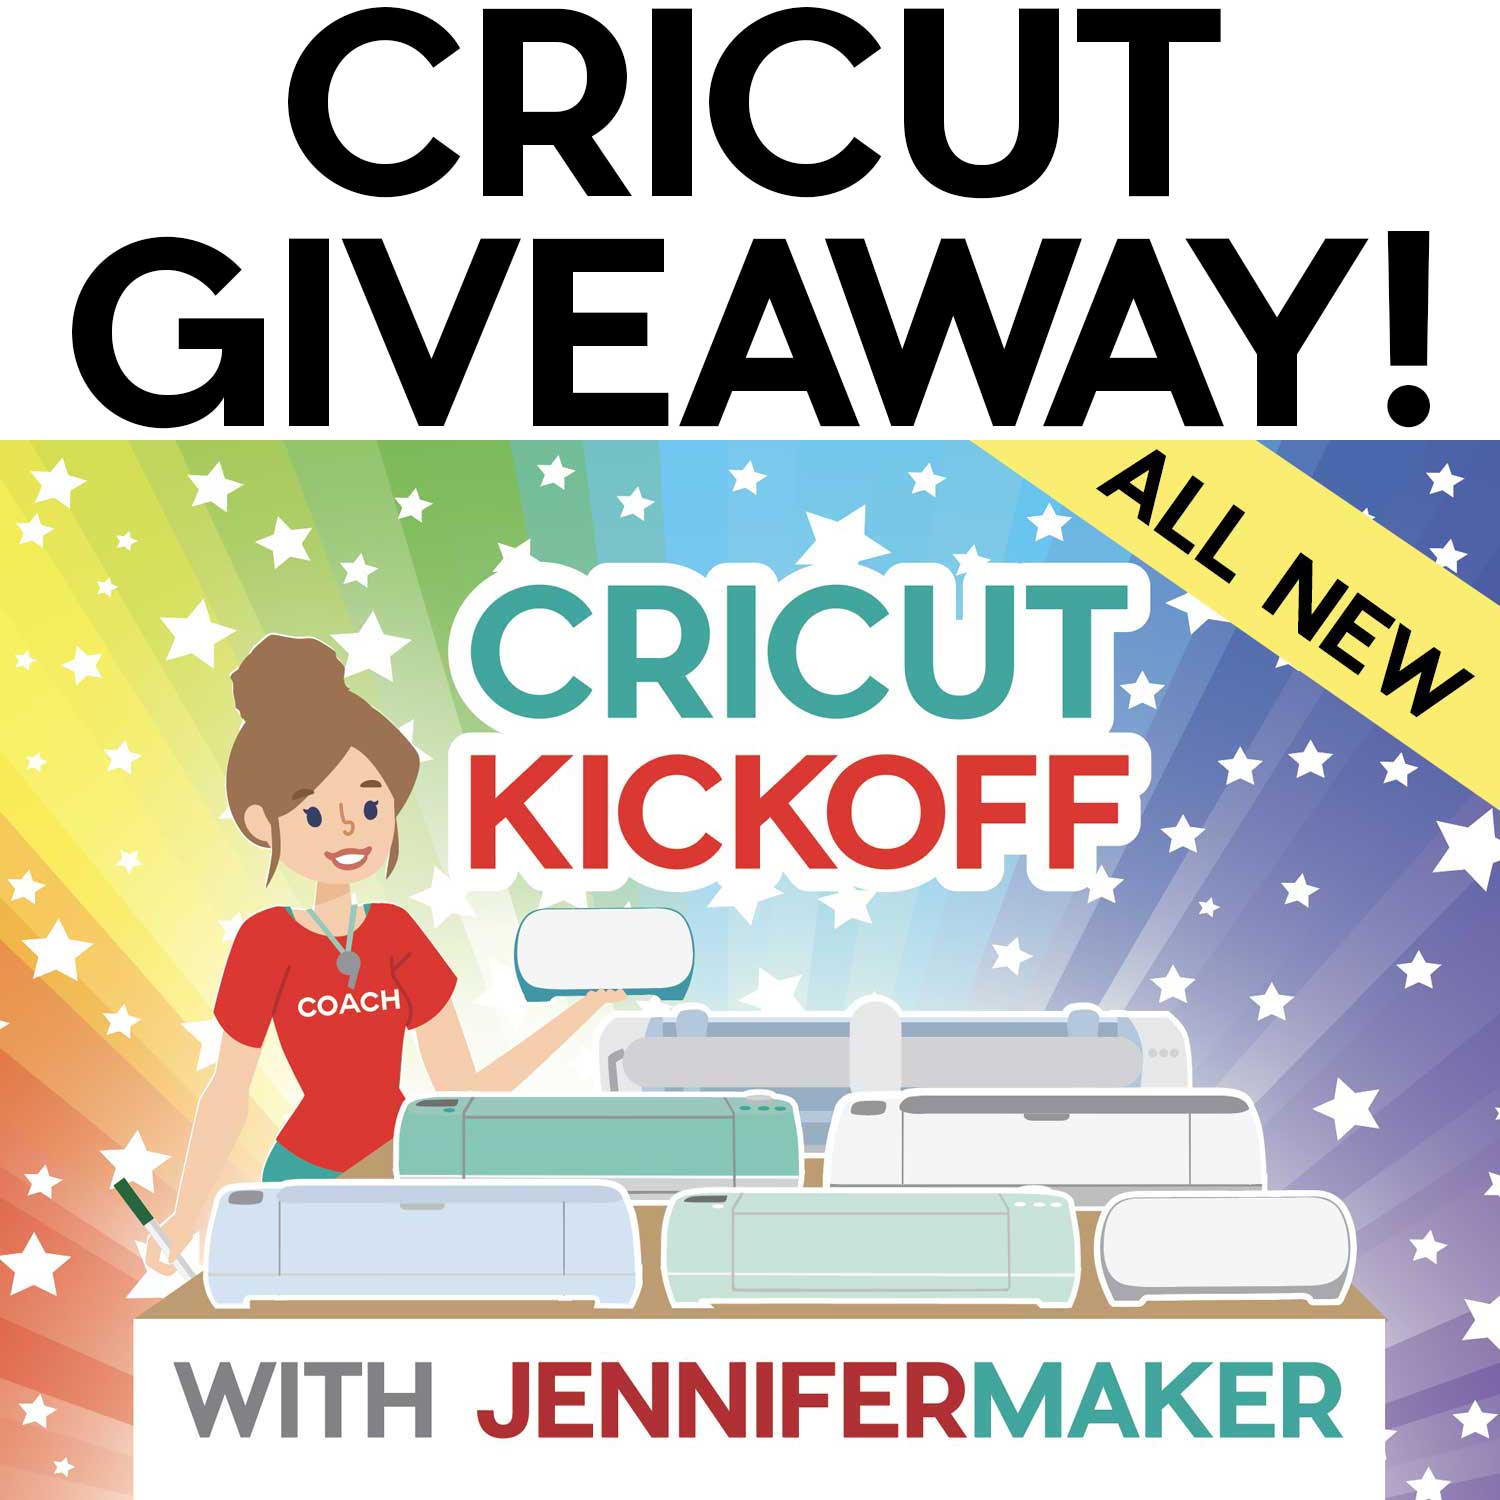 We're giving away The Ultimate Cricut Prize Pack this Back to School!